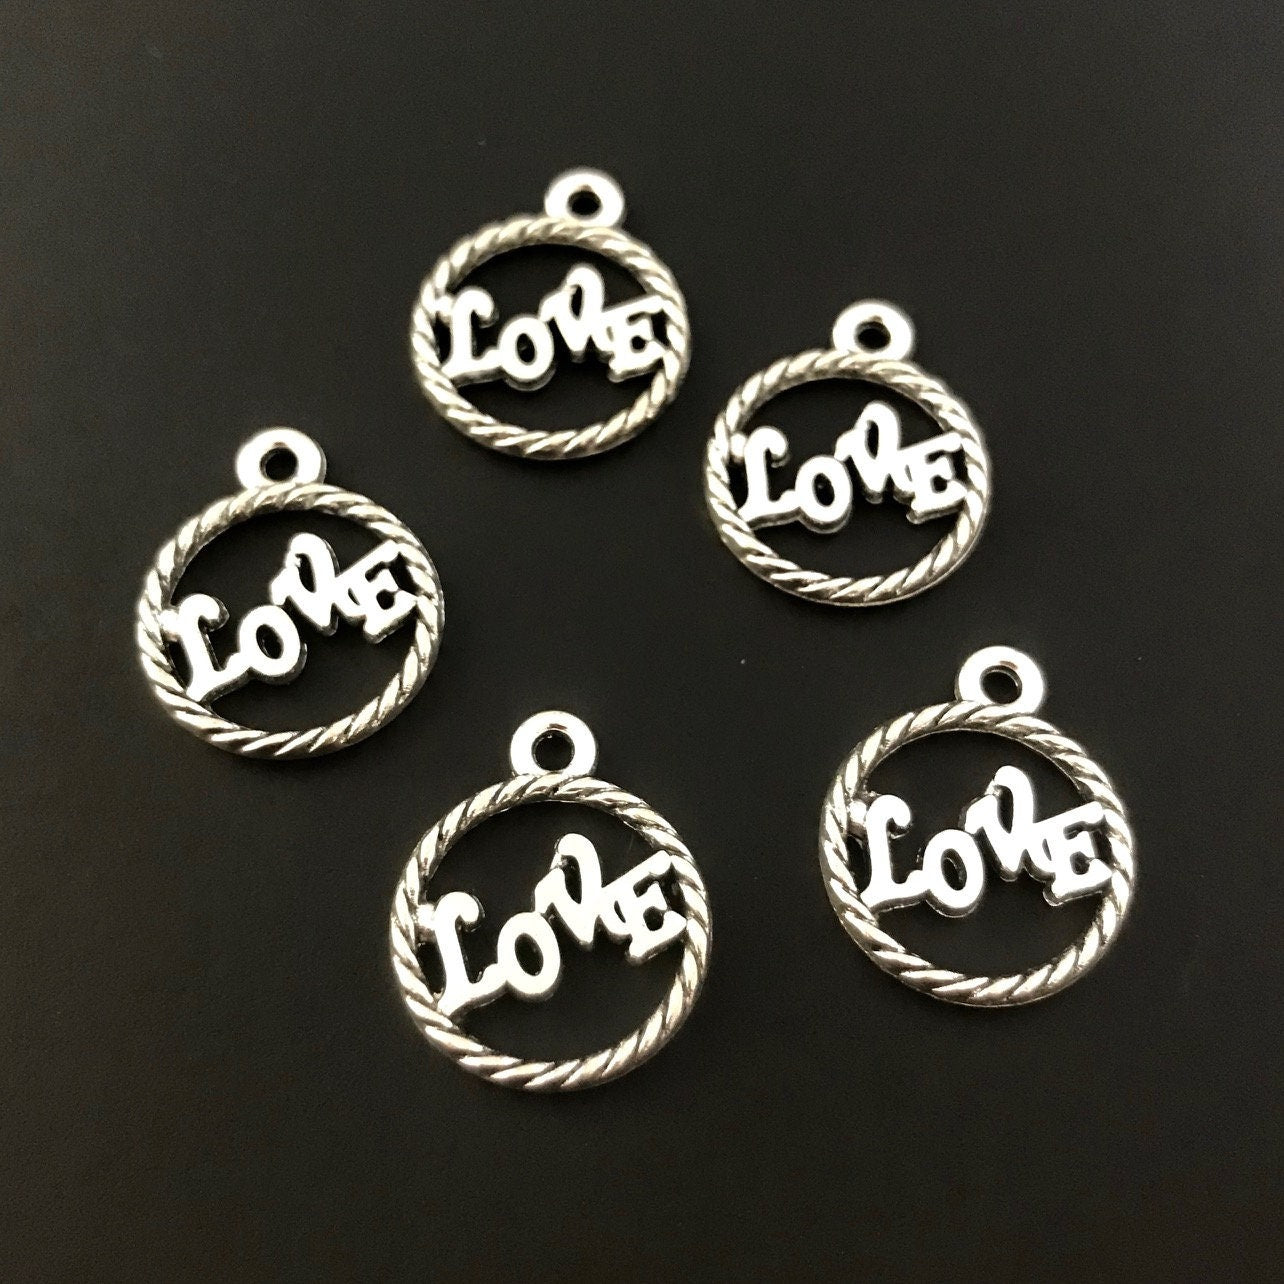 10 Love Word Charms - Antique Silver